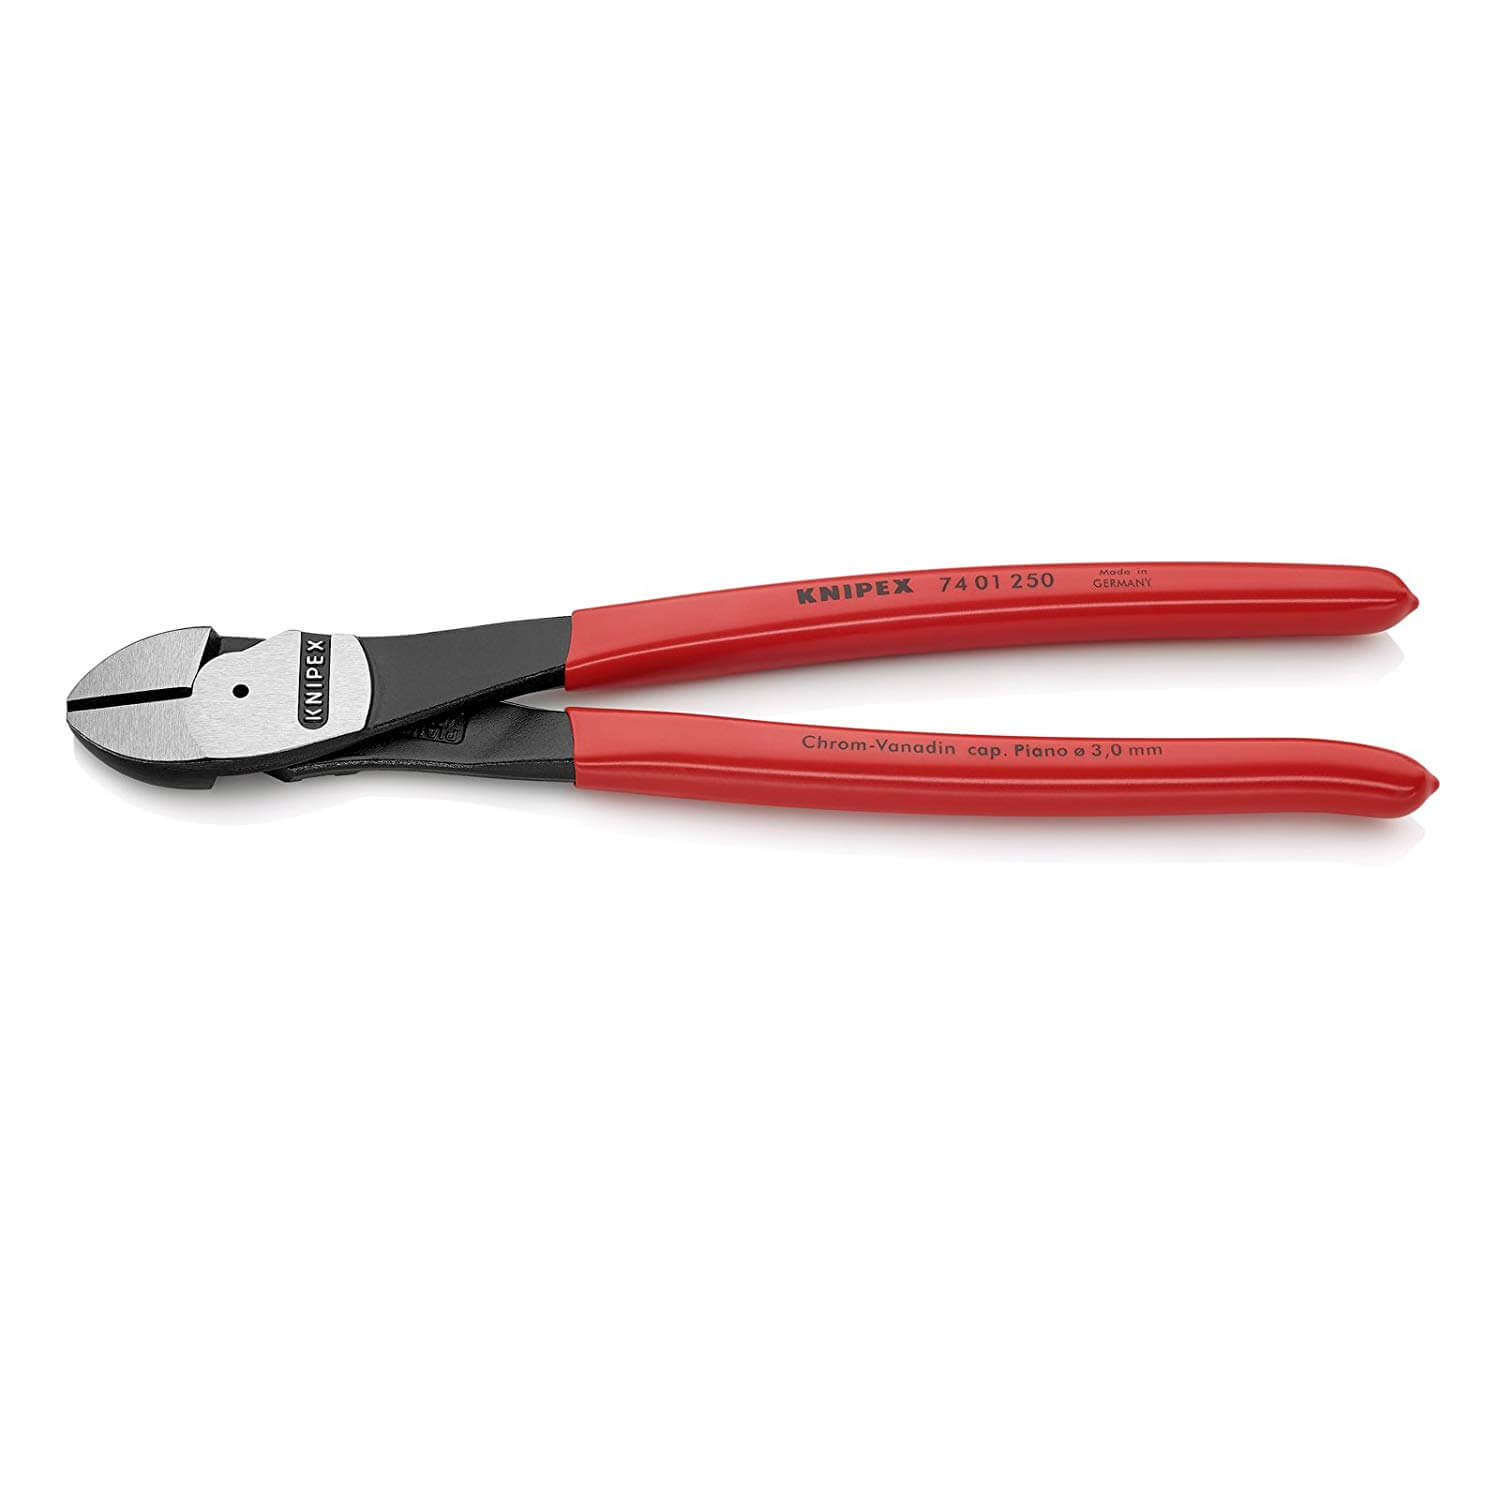 Knipex 7401250 - 10" Diagonal Cutter - wise-line-tools